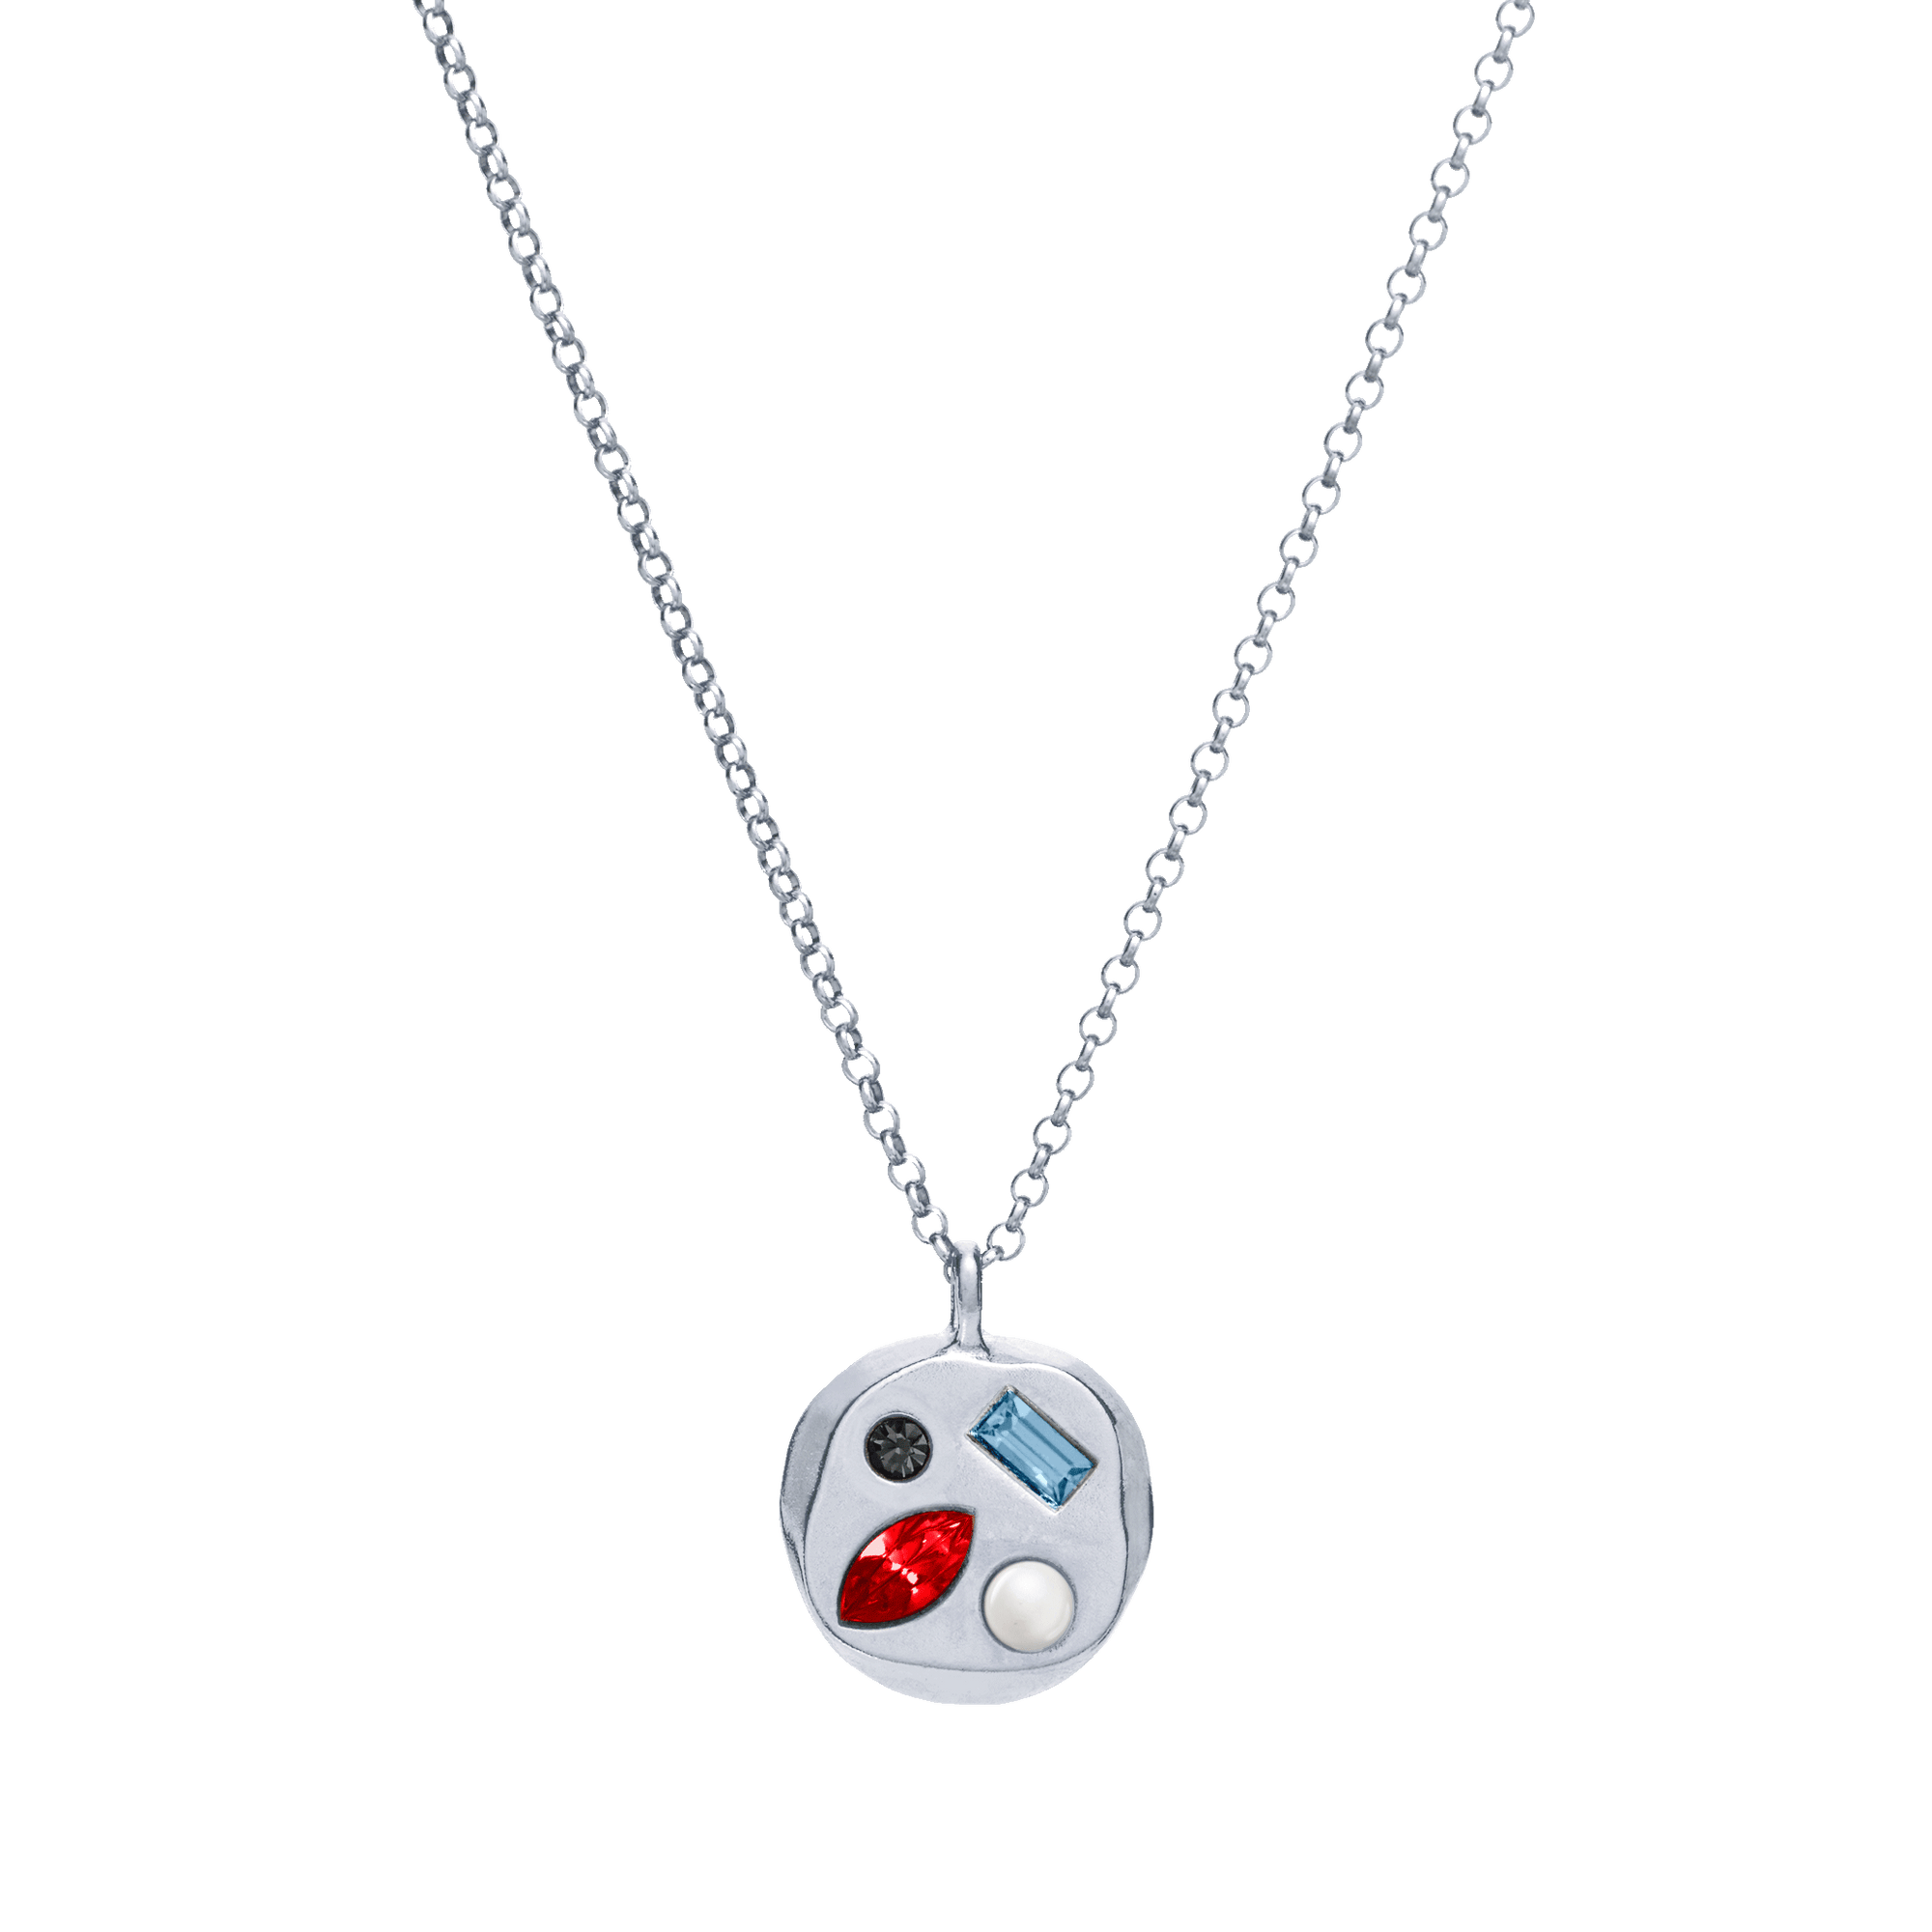 The January Fifteenth Pendant in Sterling Silver